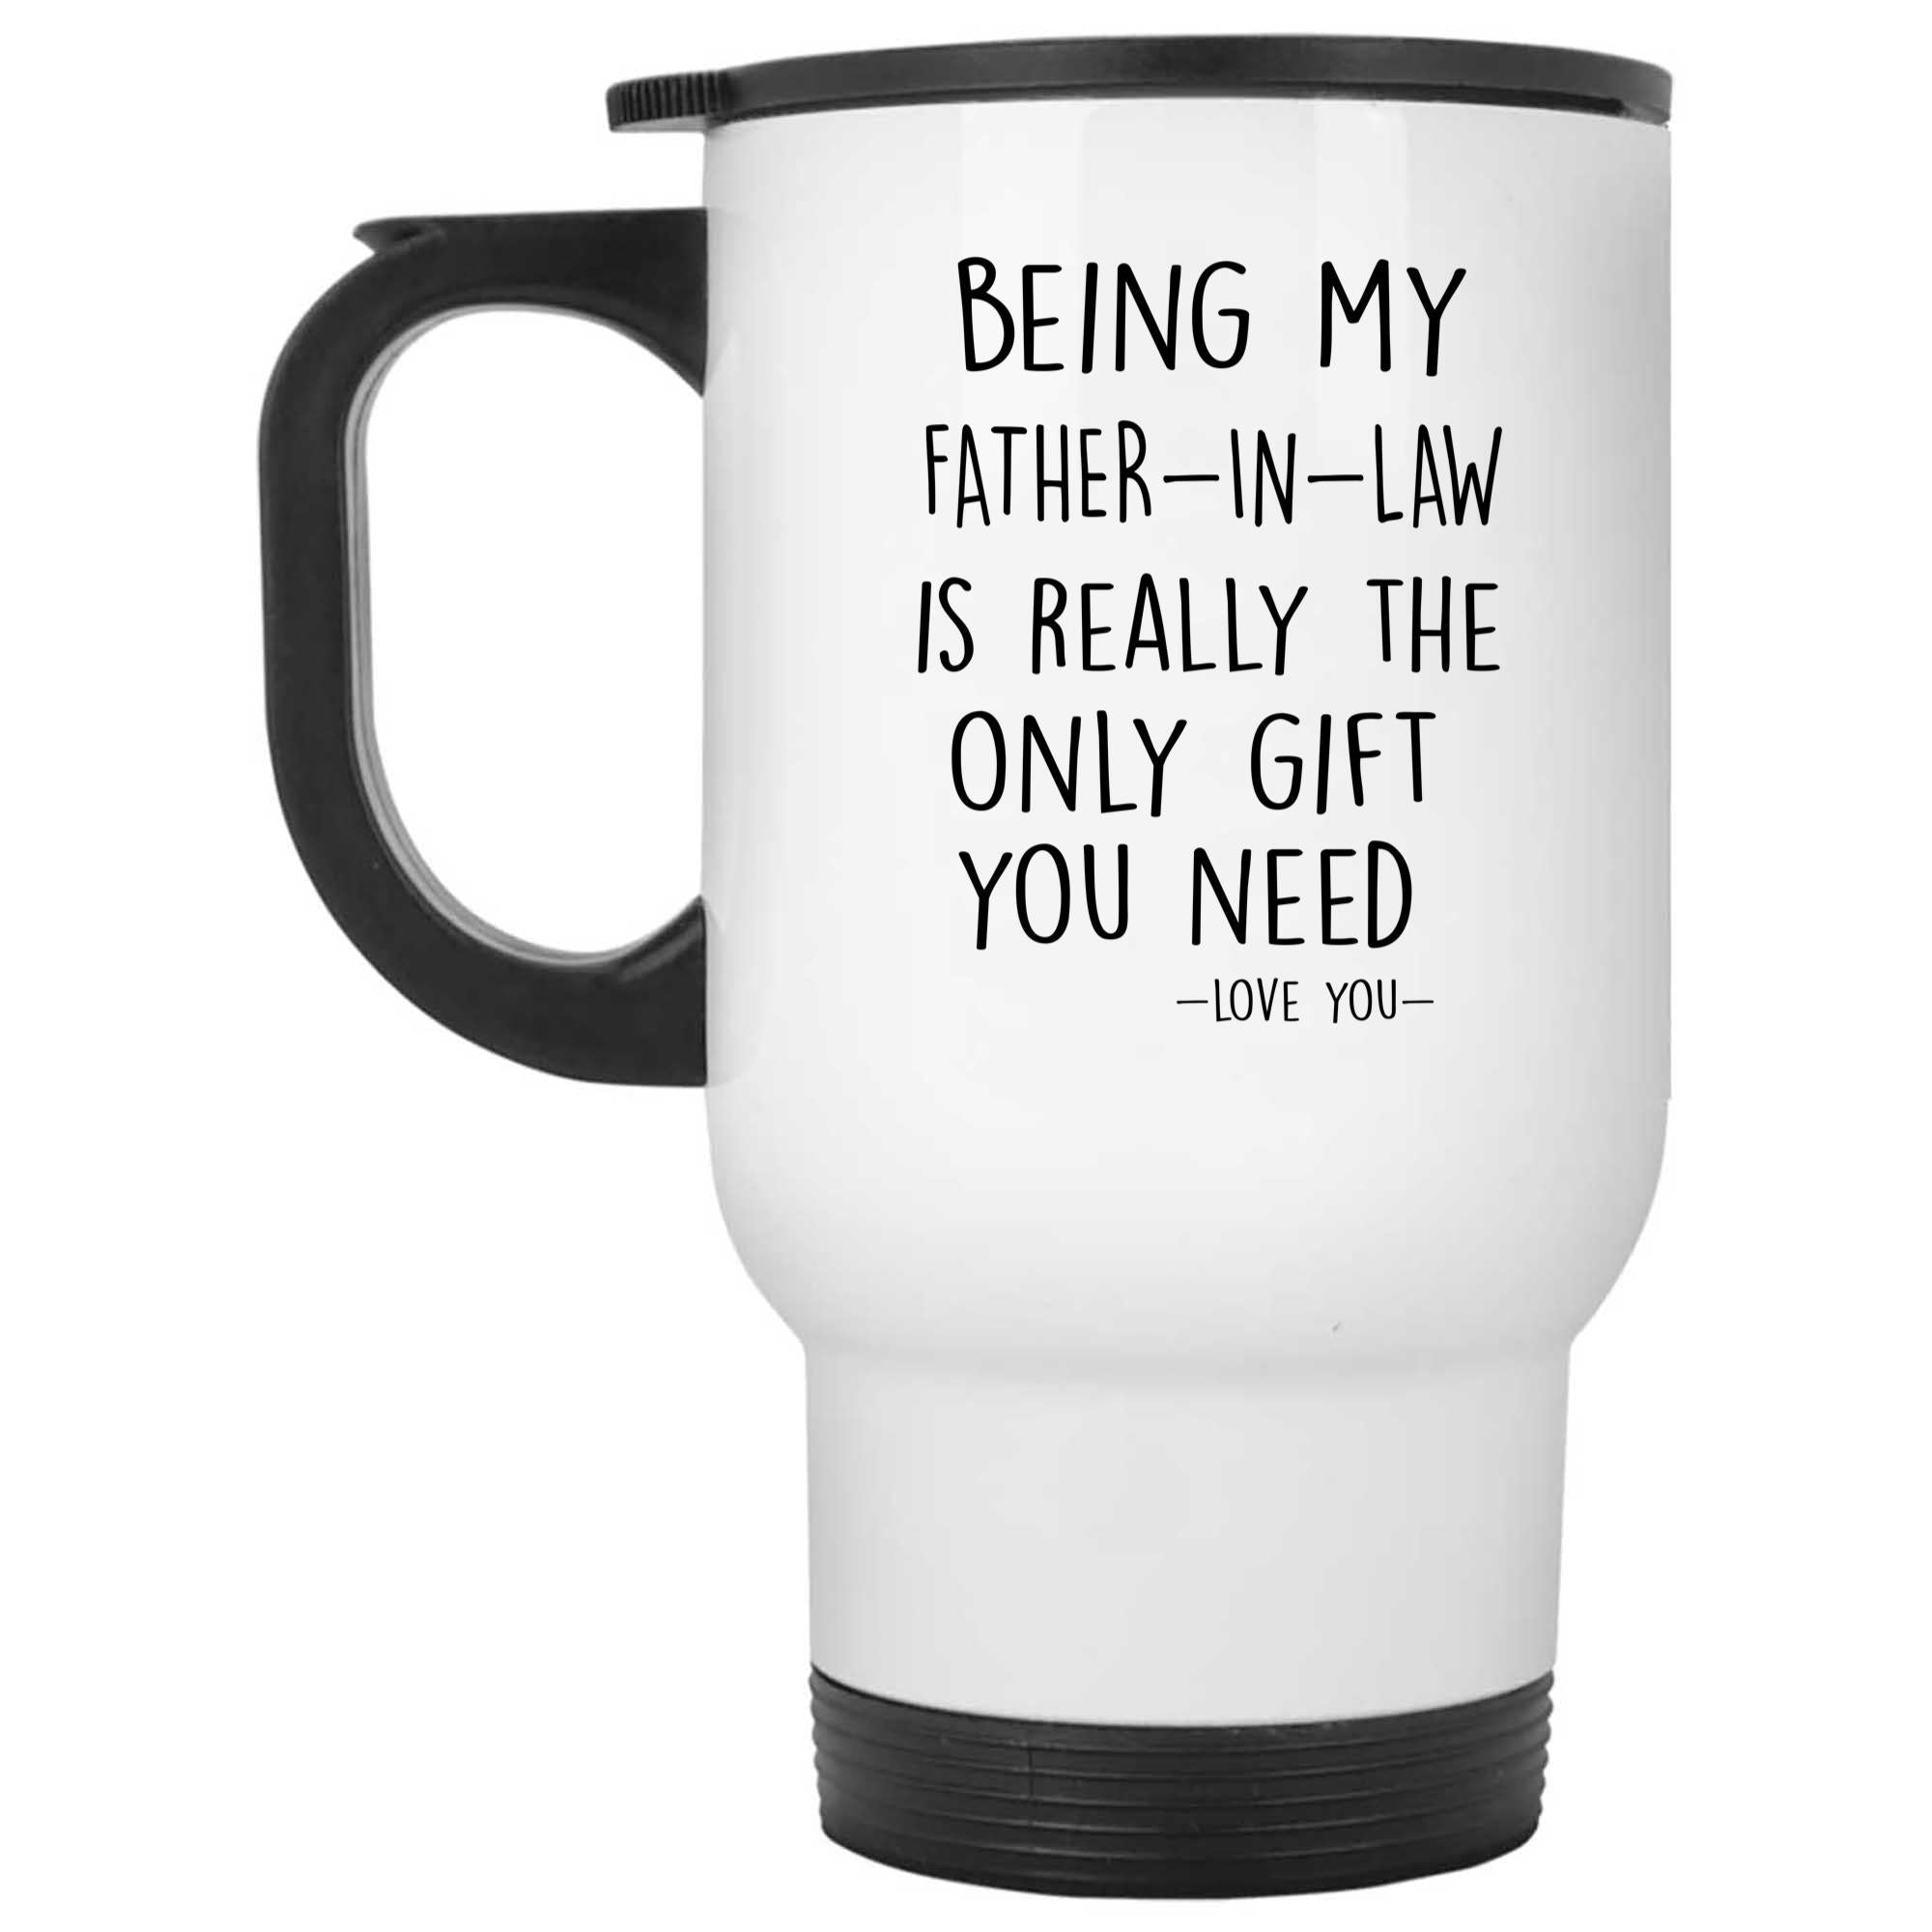 Skitongifts Funny Ceramic Novelty Coffee Mug Being My Fatherinlaw Is Really The Only You Need  Love You Fatherinlaw Funny For Father's Day aTreED8